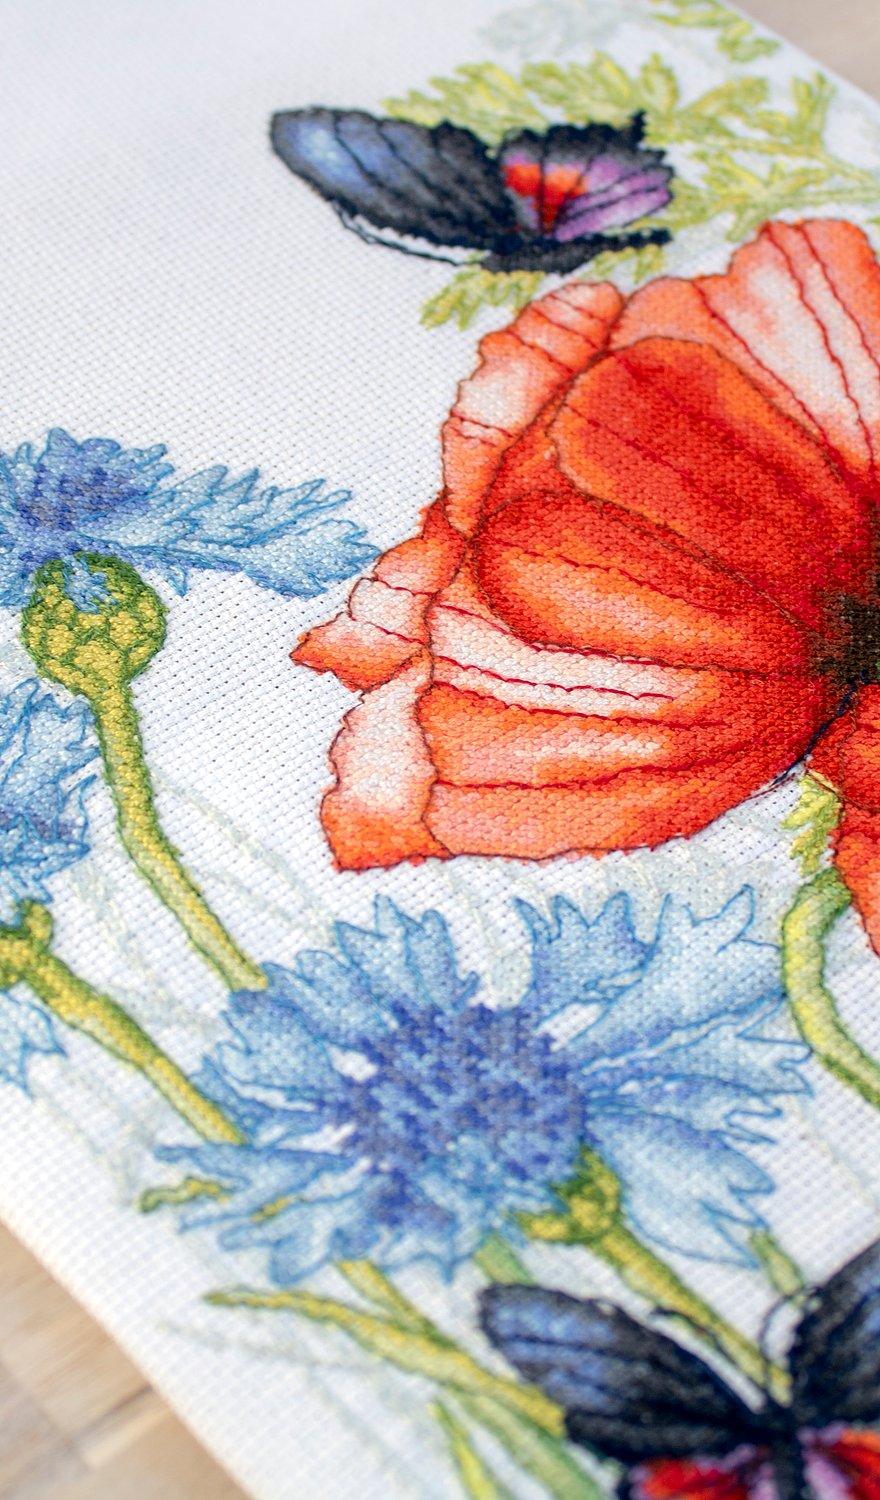 Cross Stitch Kit Luca-S - Poppies and Butterflies, BU4018 - Luca-S Cross Stitch Kits